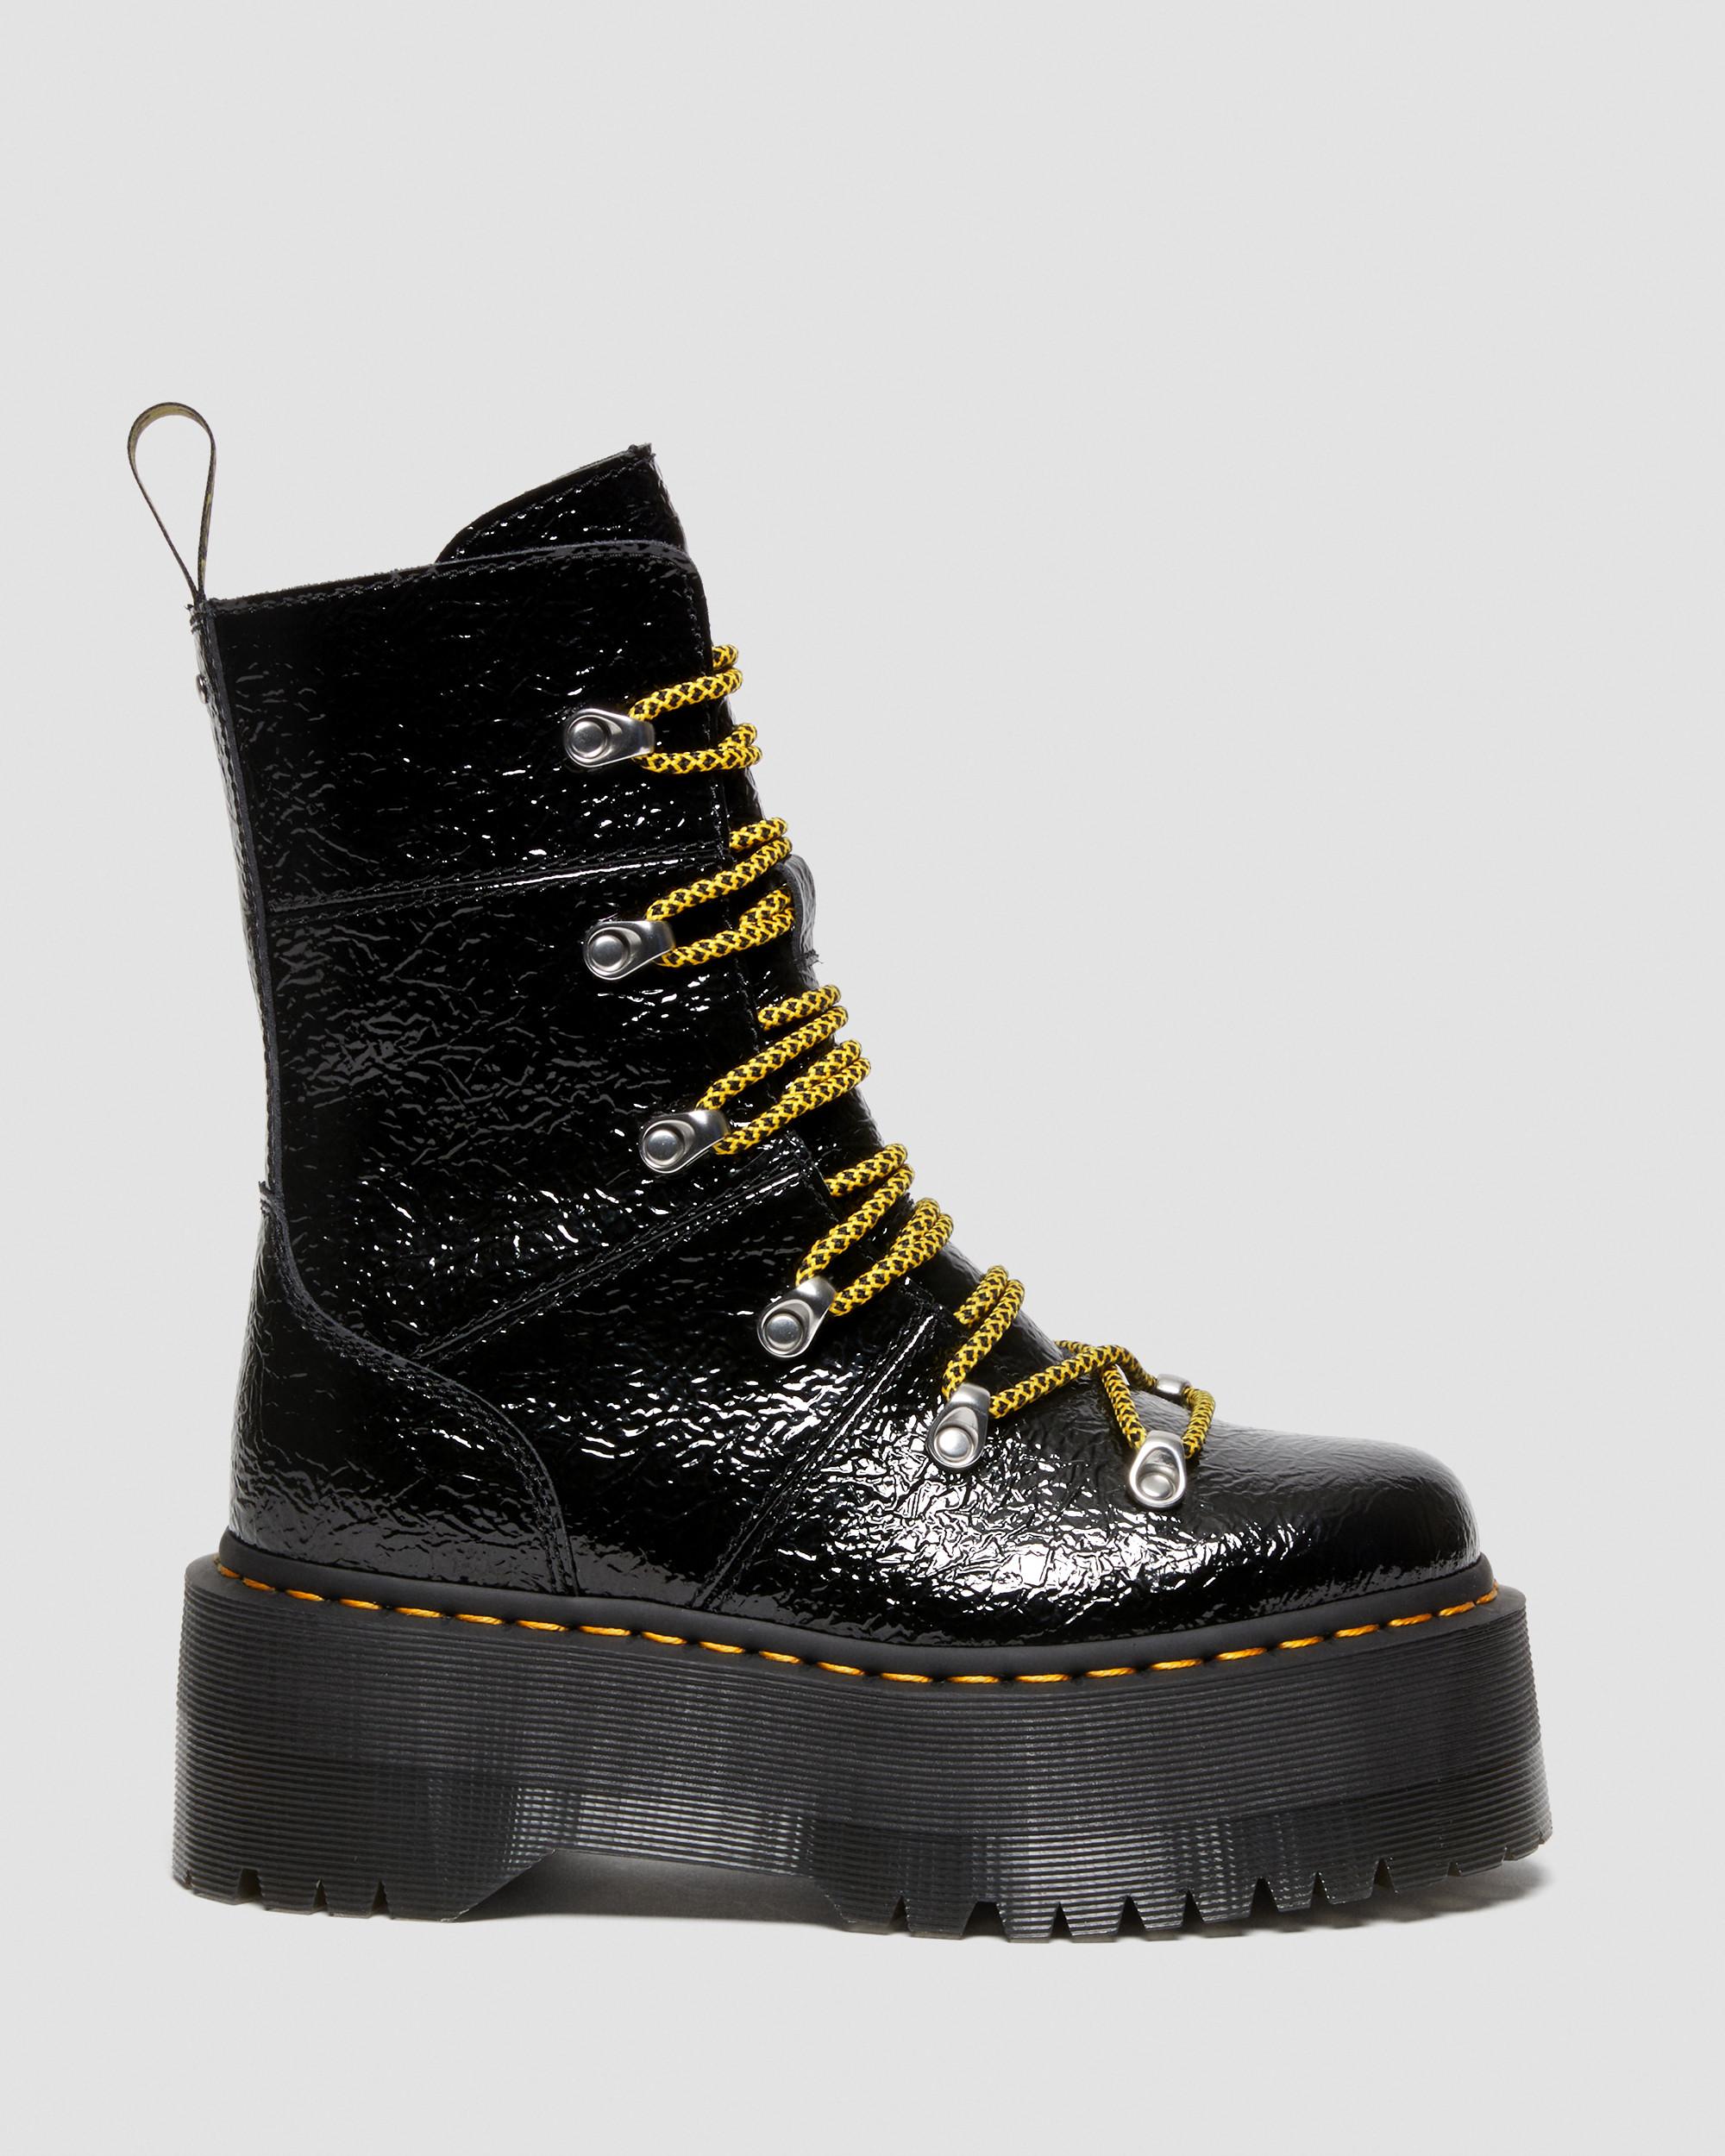 Ghilana Max Distressed Patent Leather Platform Boots | Dr. Martens